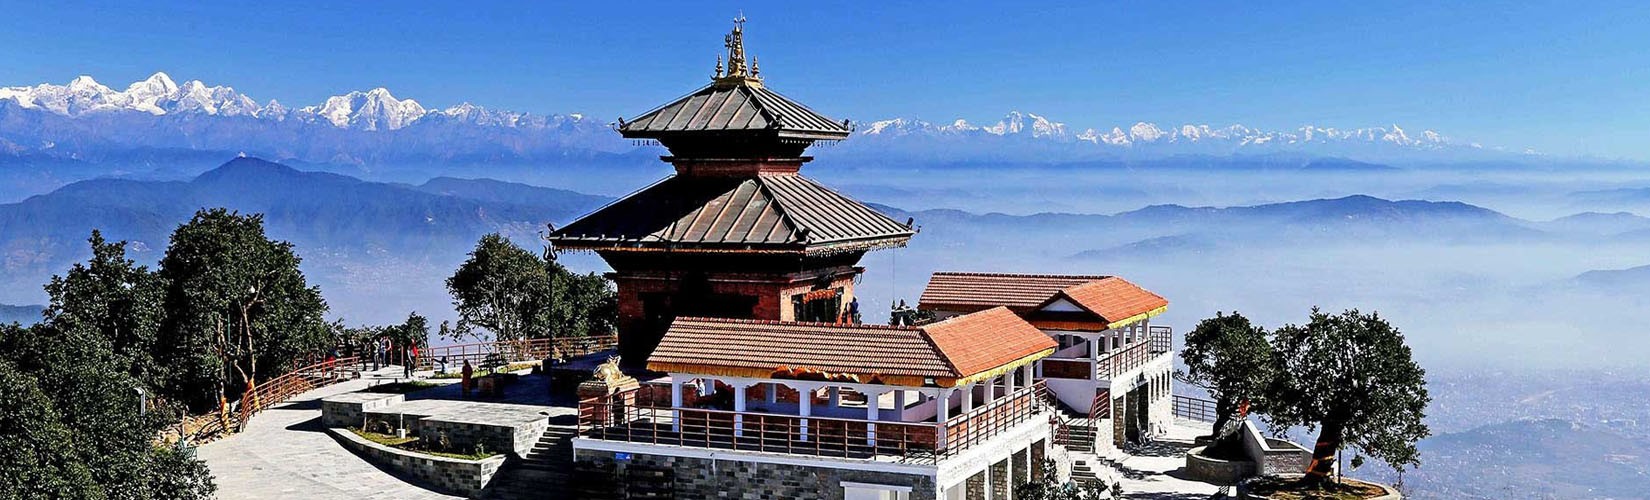 Nepal Family Holiday Tour Package | Reasonable Treks And Tour | Visit Nepal 2020